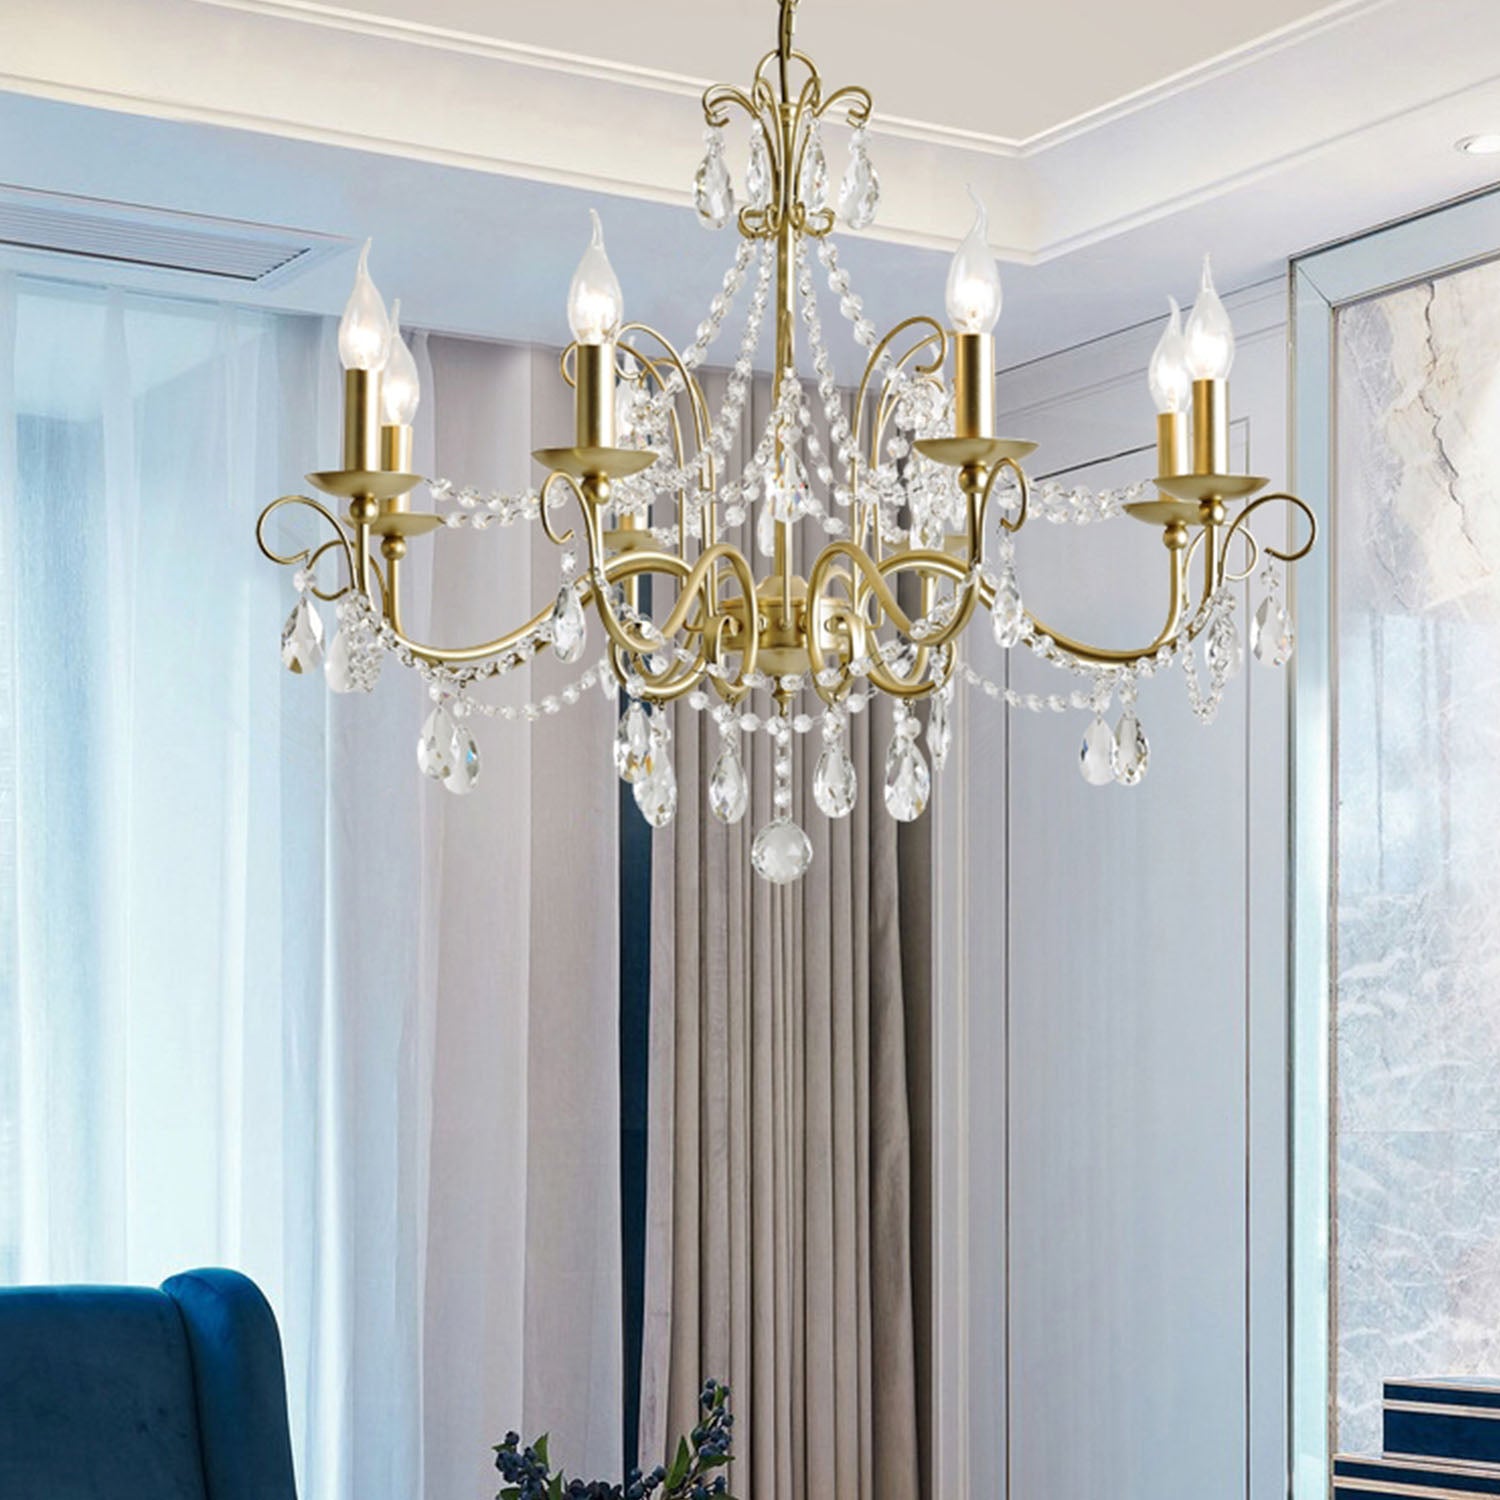 Gold Metal Candle Style Crystal Chandelier - 6 Light